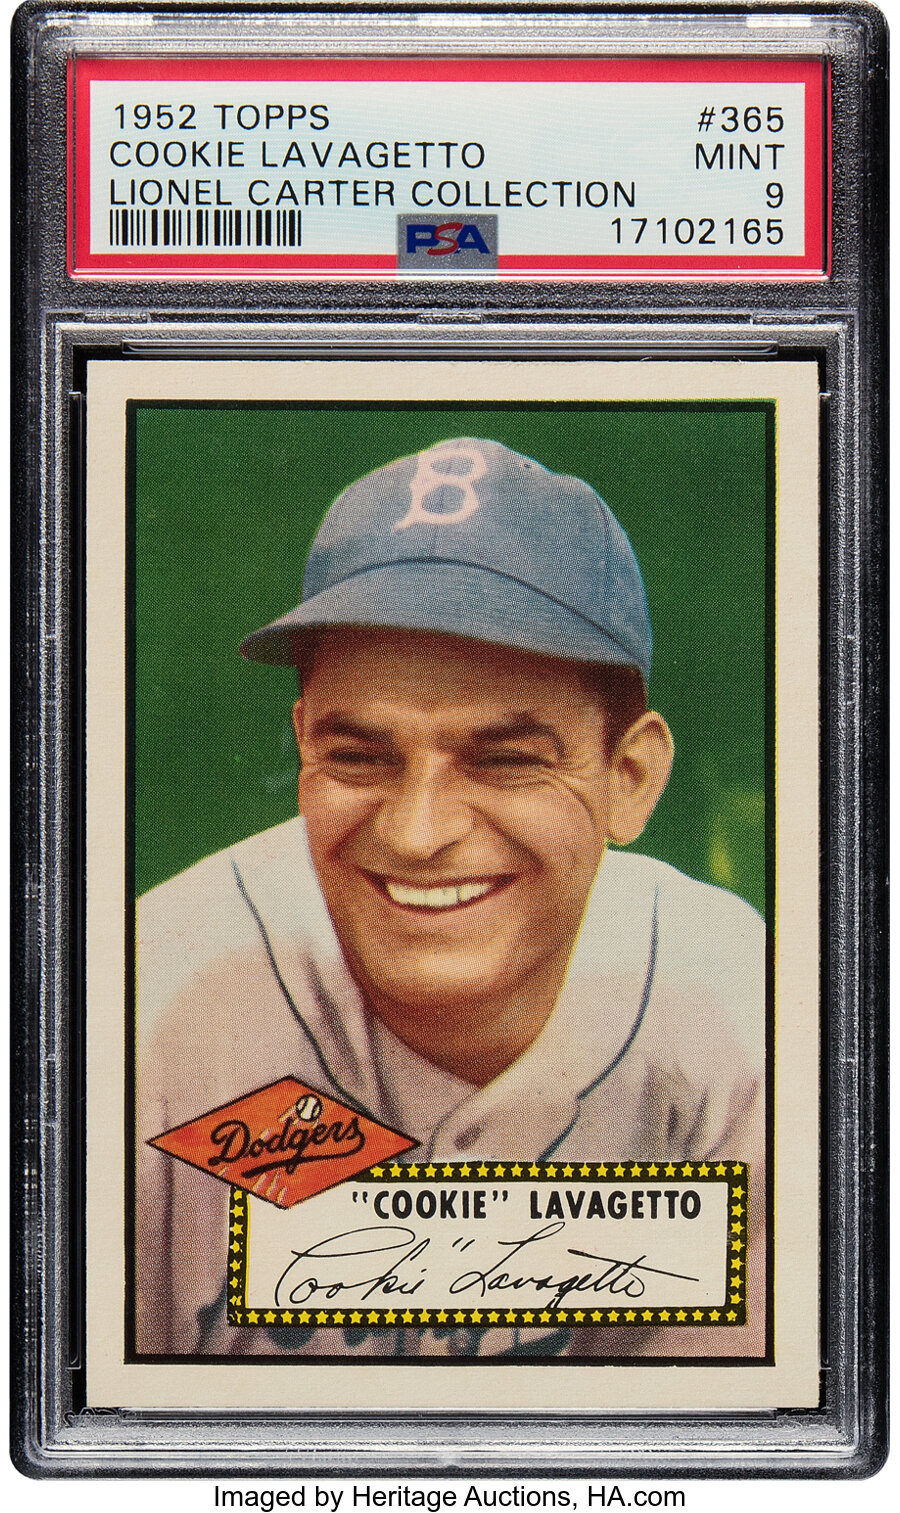 1952 Topps Cookie Lavagetto #365 PSA Mint 9 - None Superior! From the Lionel Carter Collection